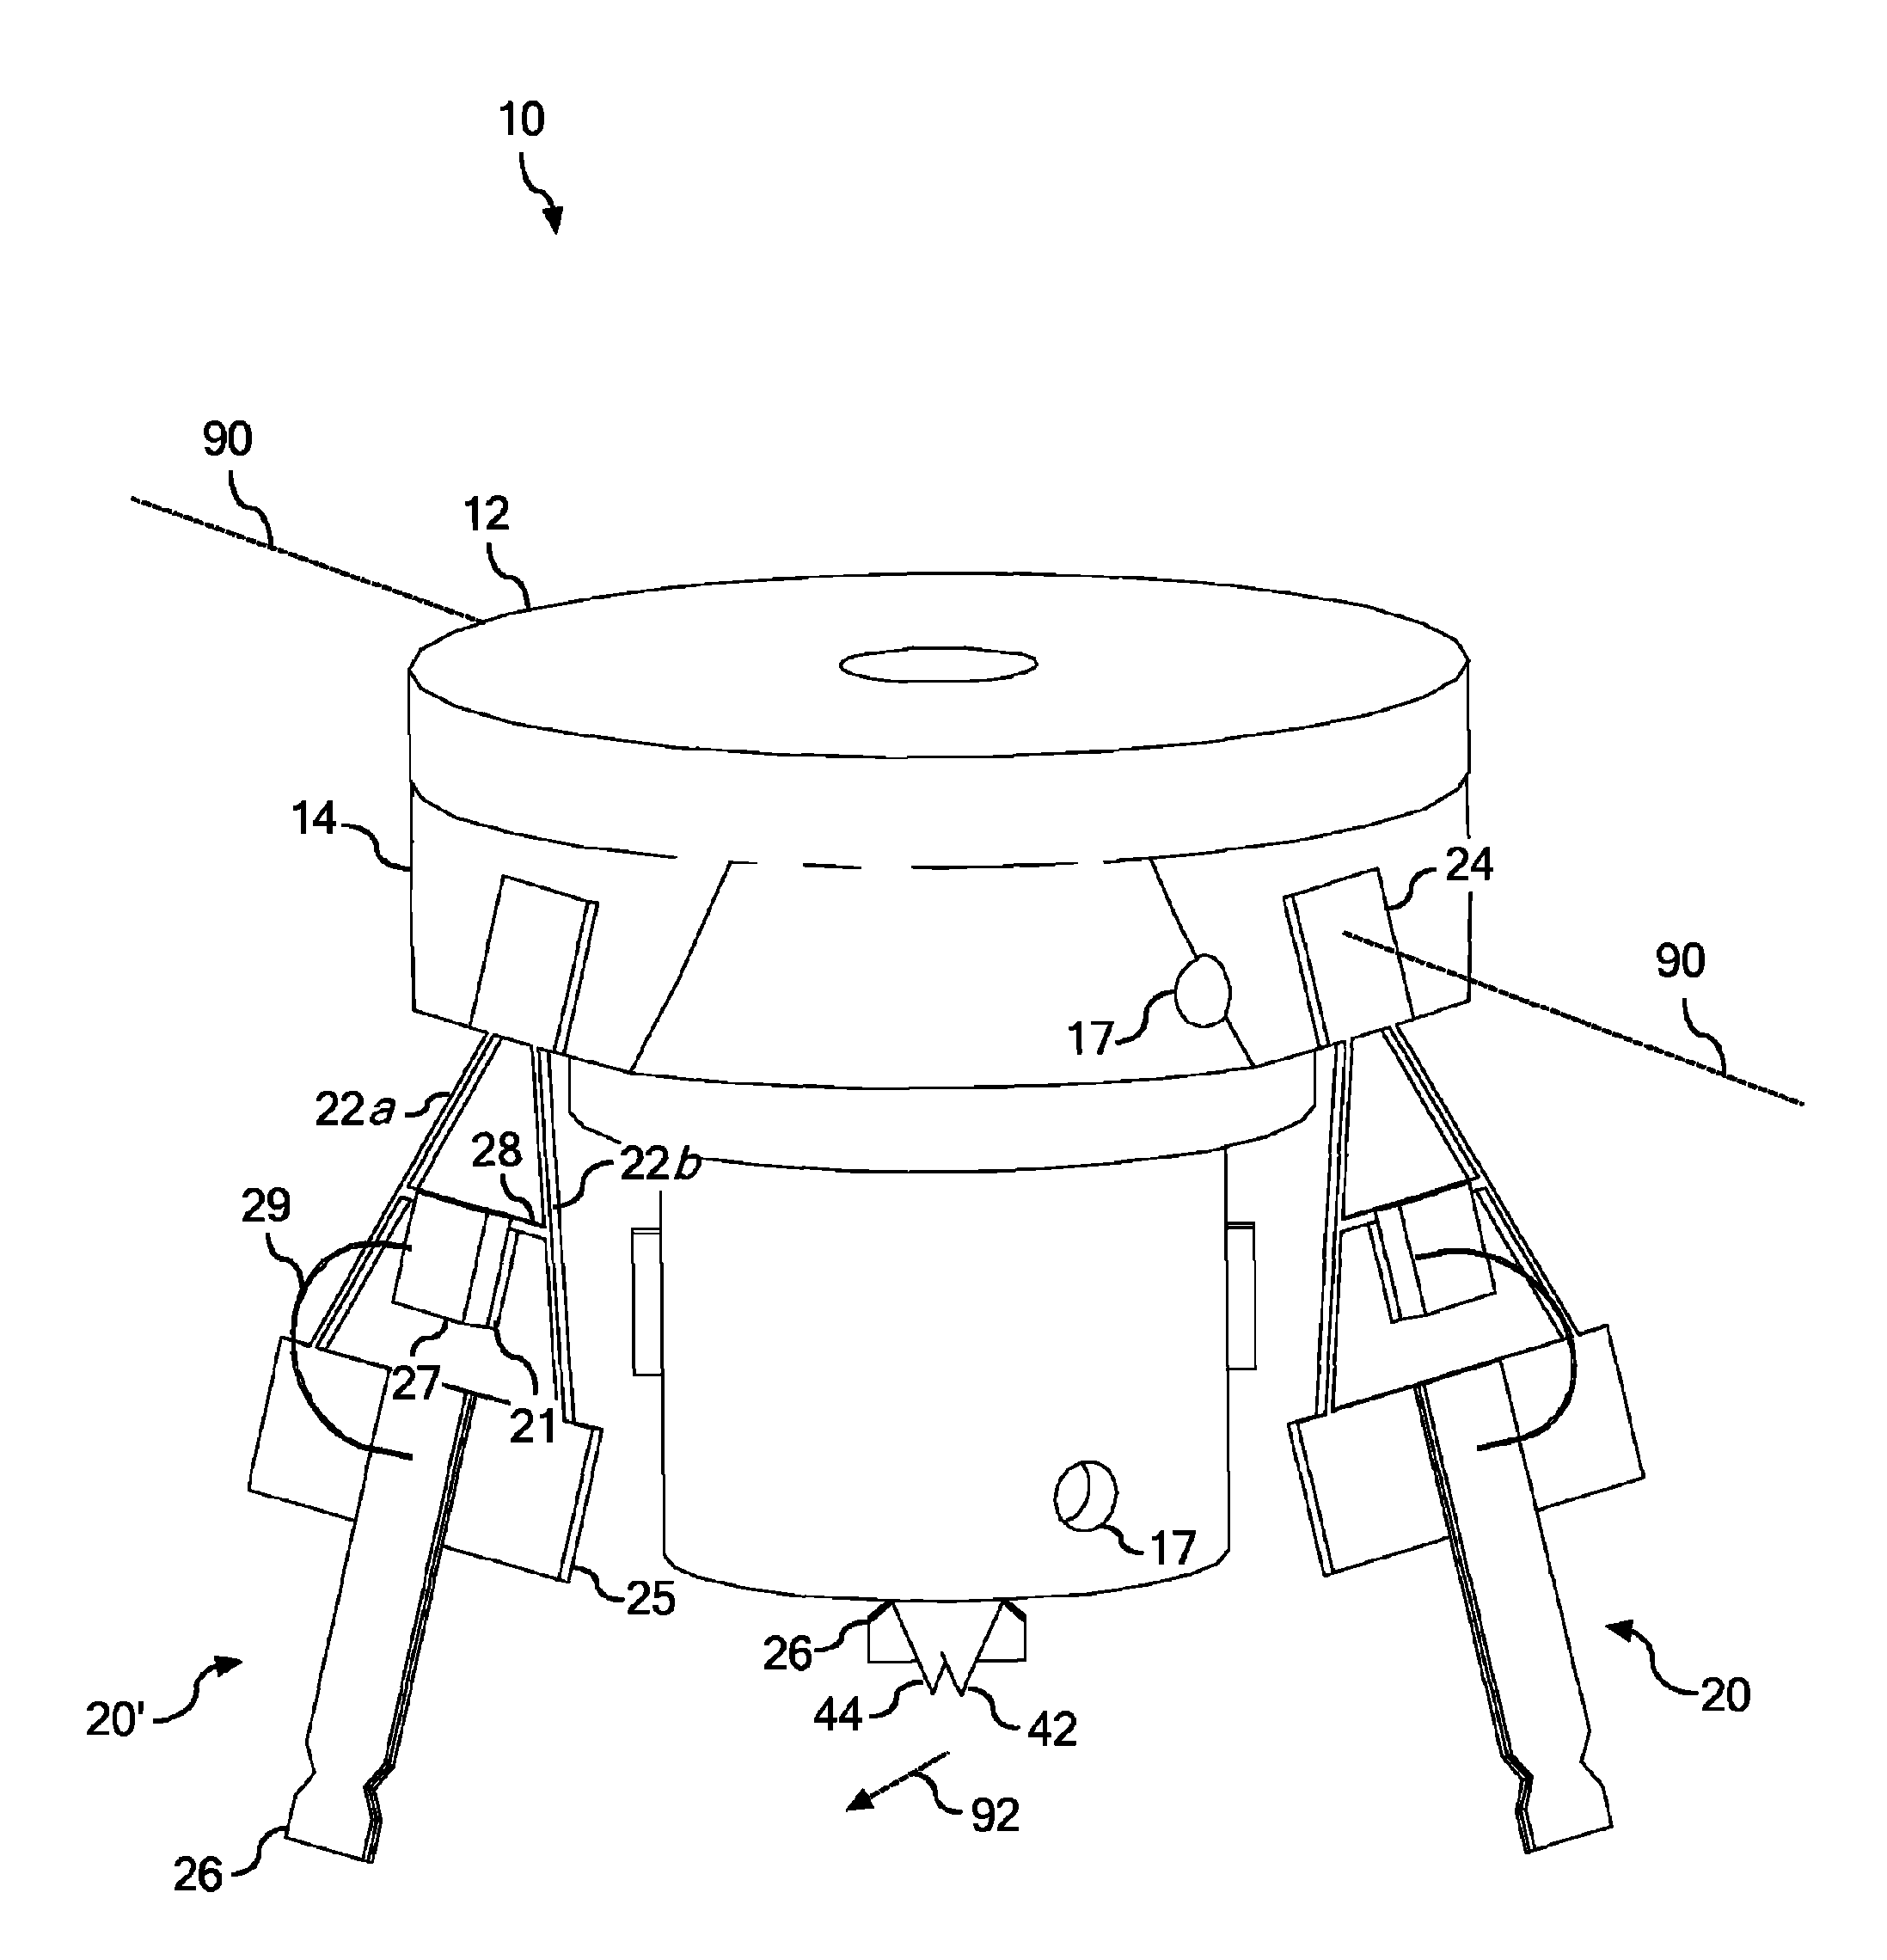 Connecting structures comprising heated flexures and optical packages incorporating the same